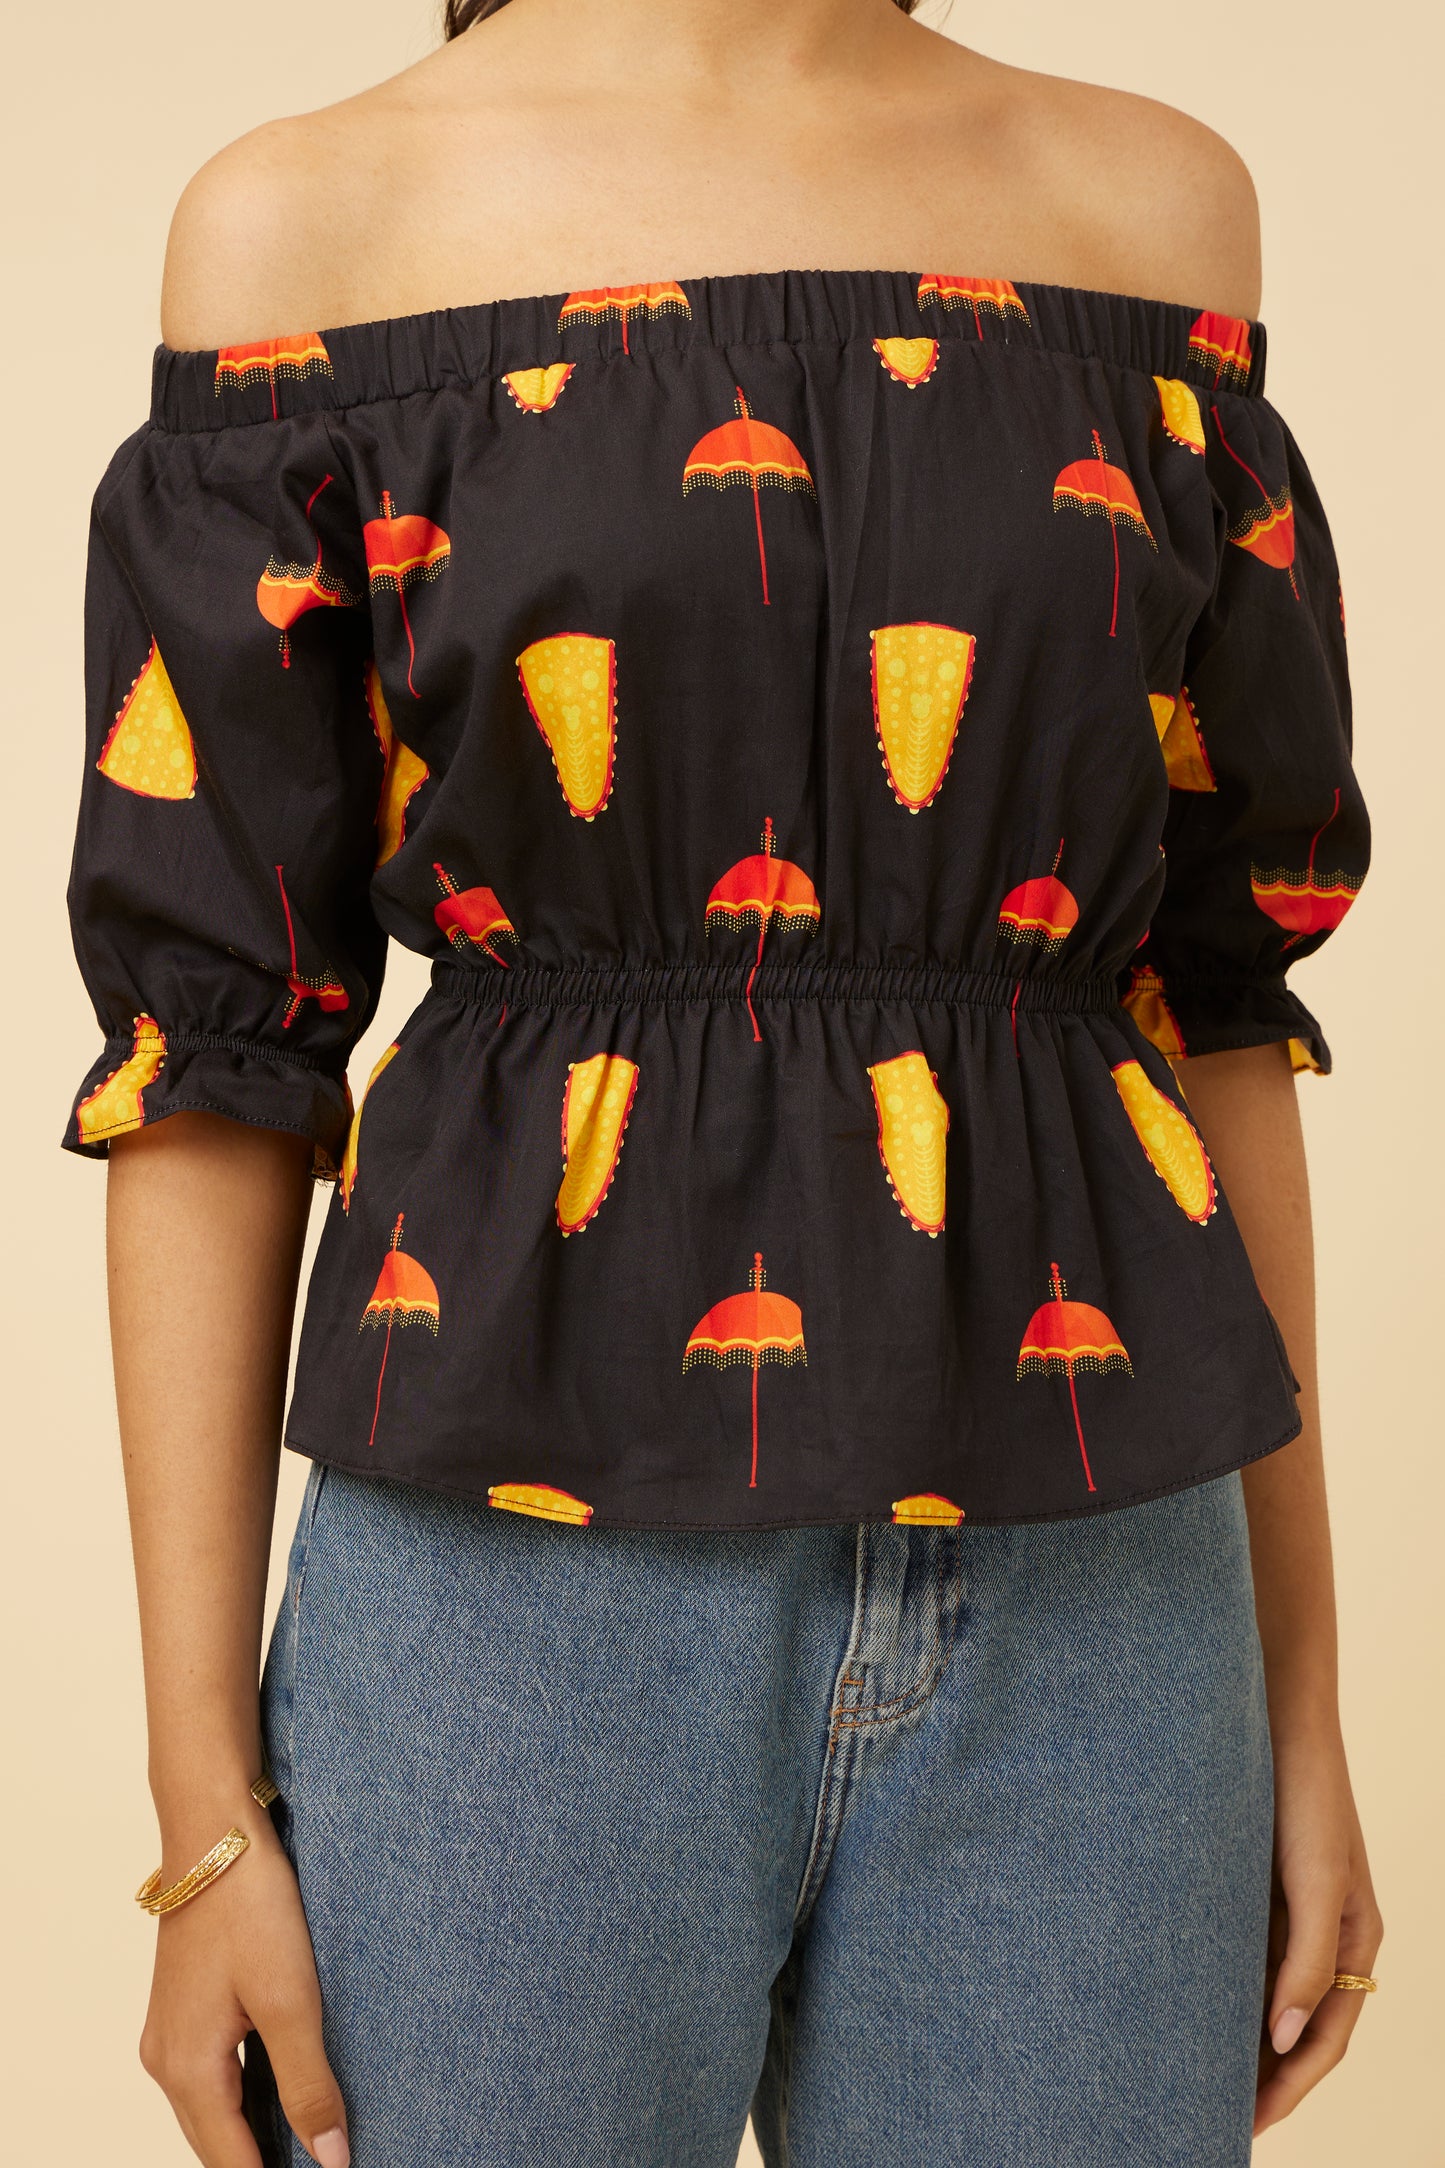 Close-up of the back of the Spree in Black Off-Shoulder Top, emphasizing the elastic cinched waist and balloon sleeve detail with cultural motifs